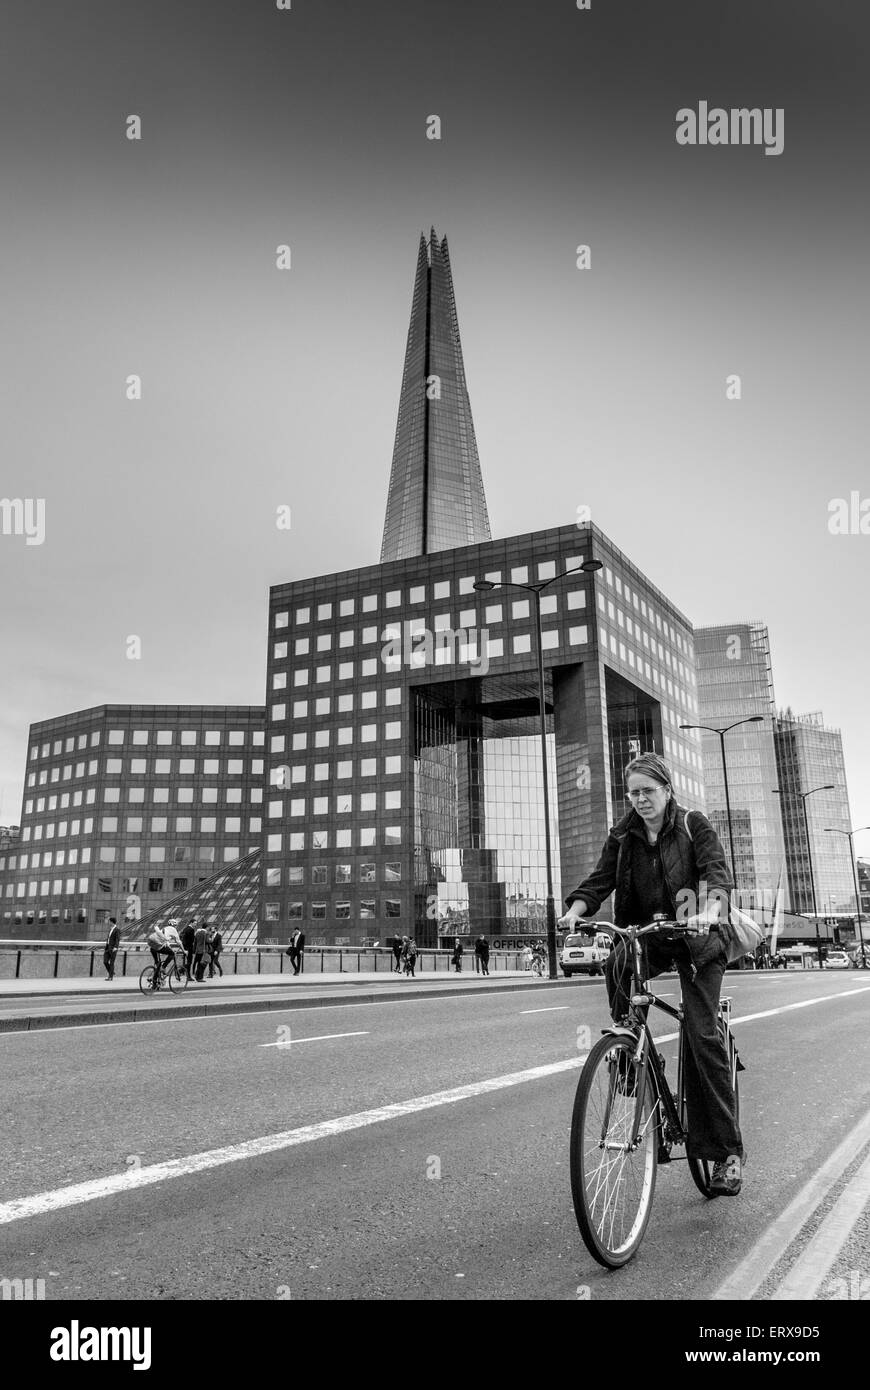 Cyclist crossing London bridge on bike with The Shard in the background, London, UK. Stock Photo